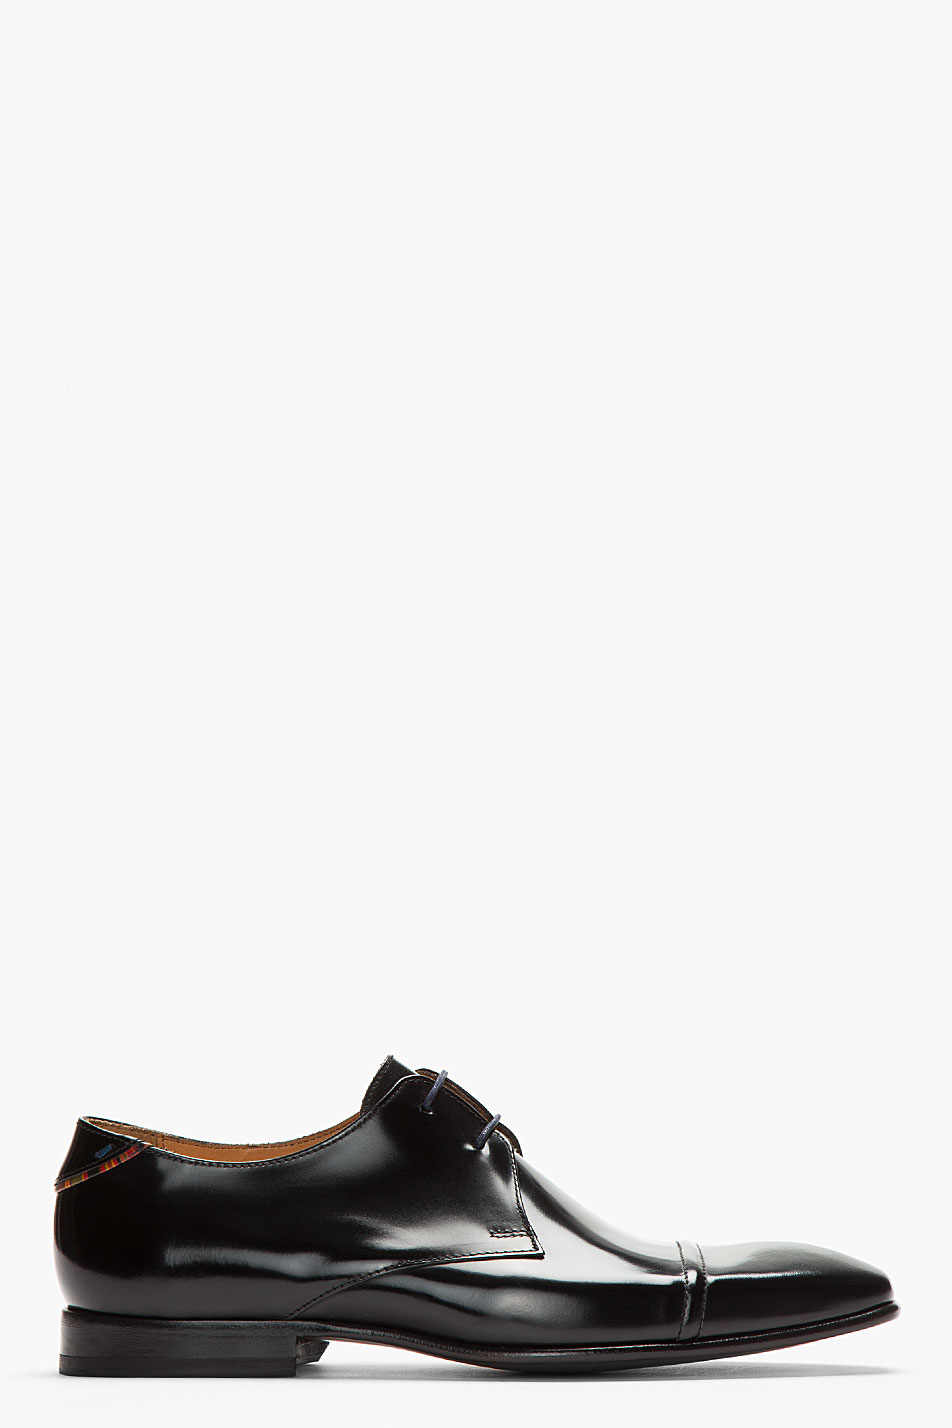 Dress to Impress Black Patent Leather Shoes 2